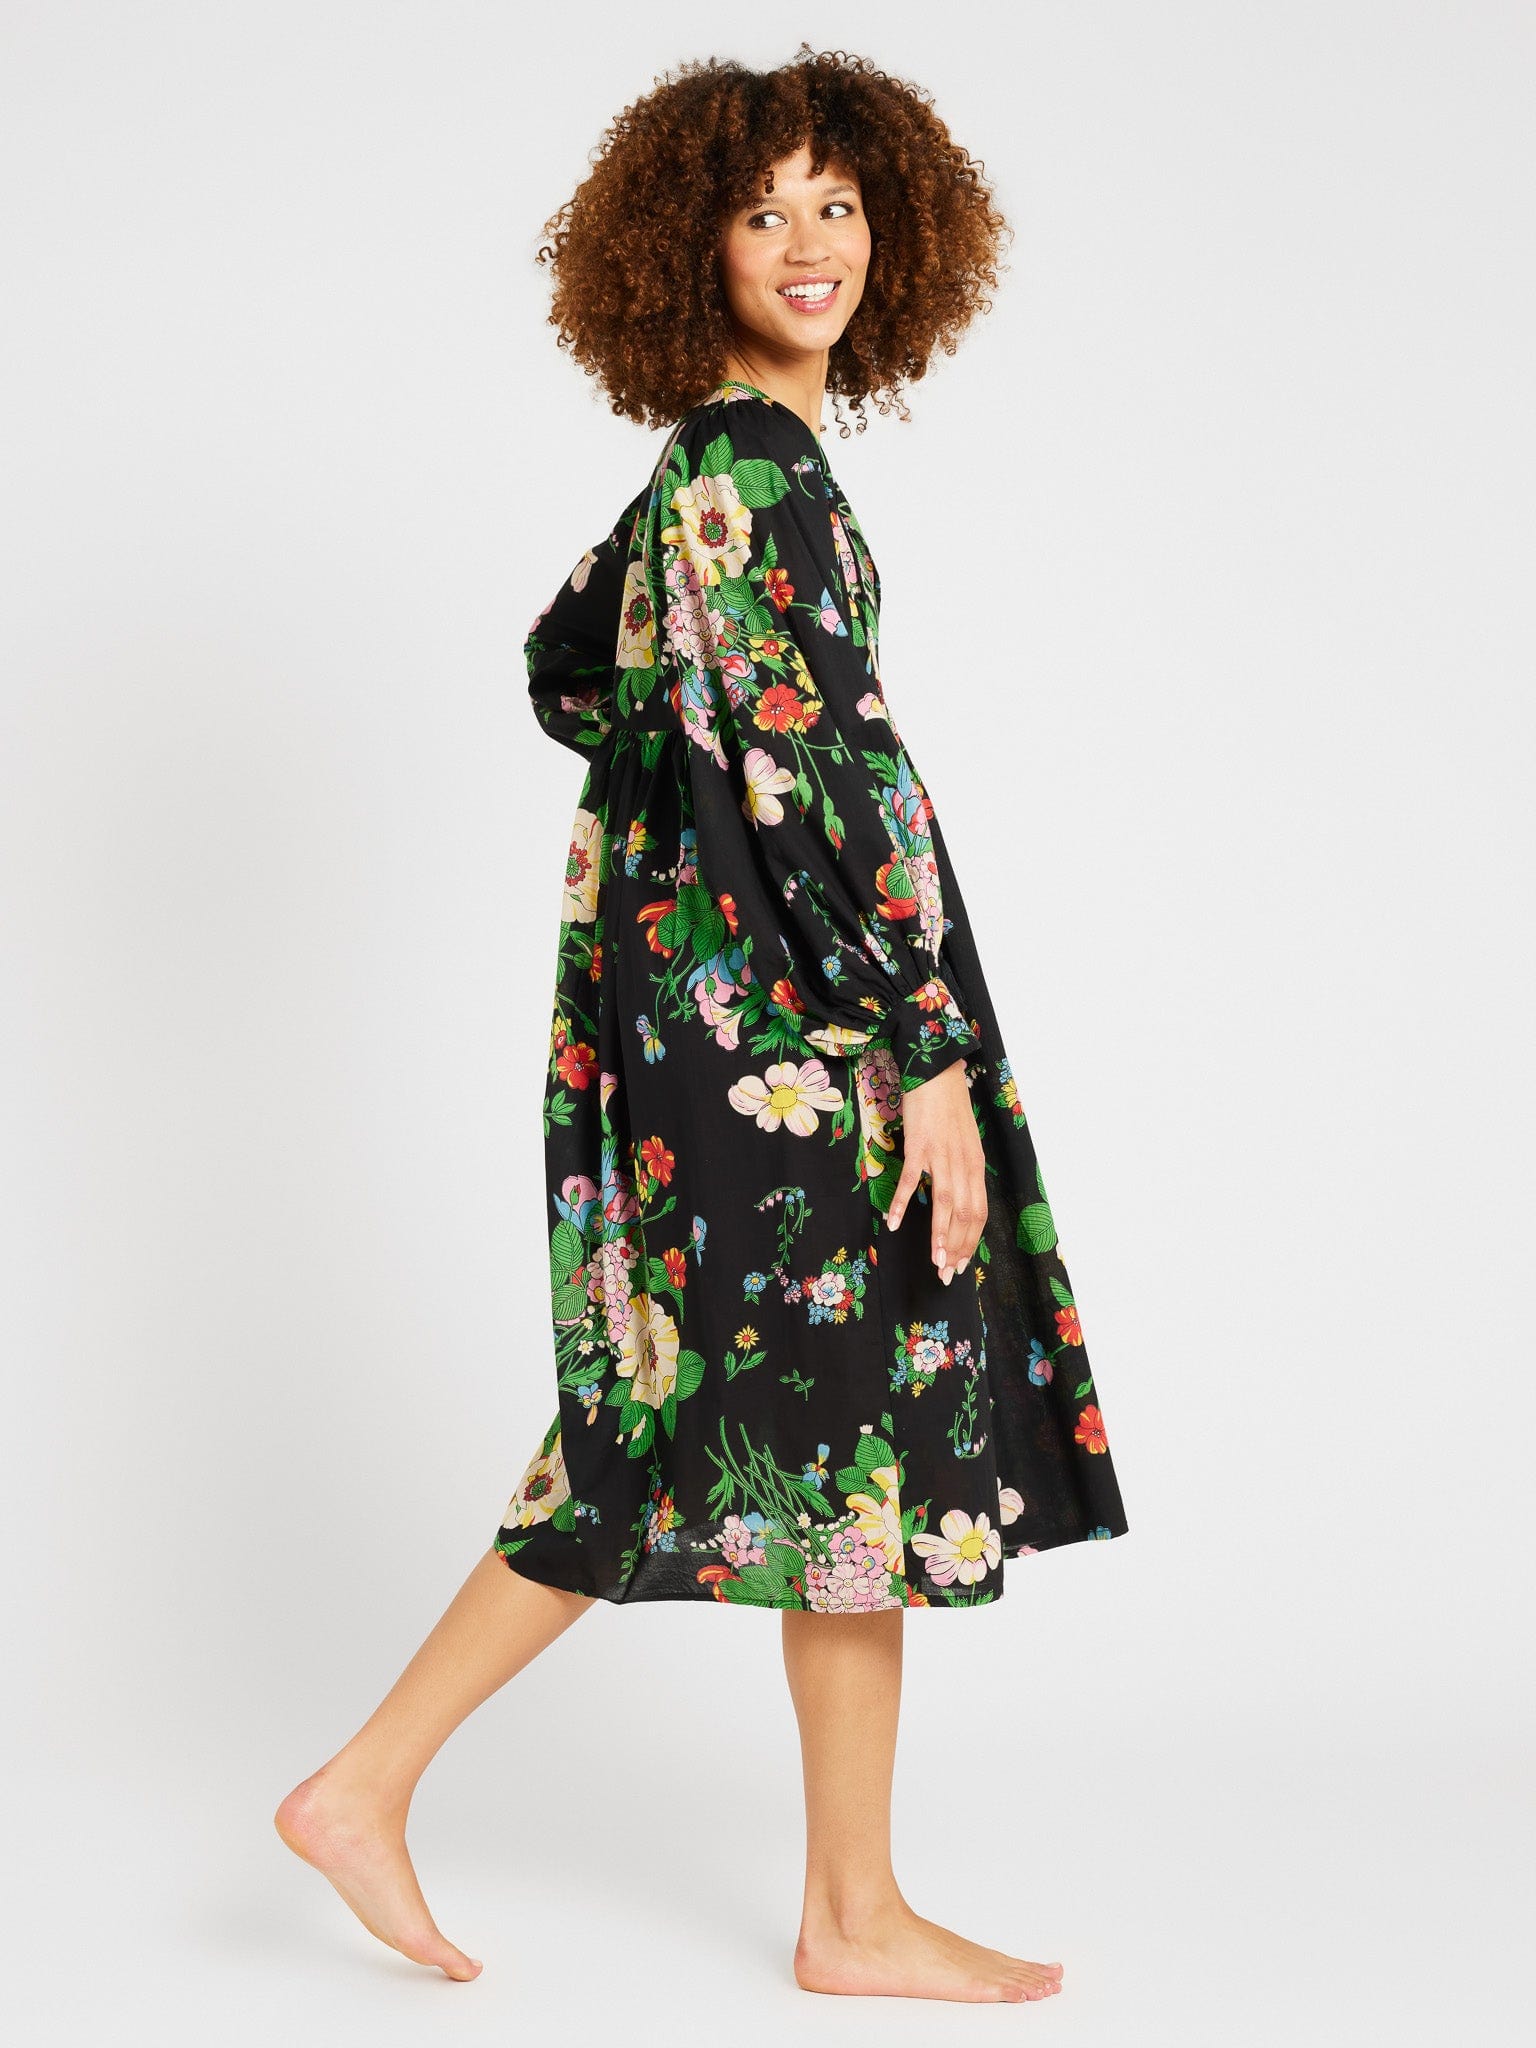 MILLE Clothing Michelle Dress in Finale